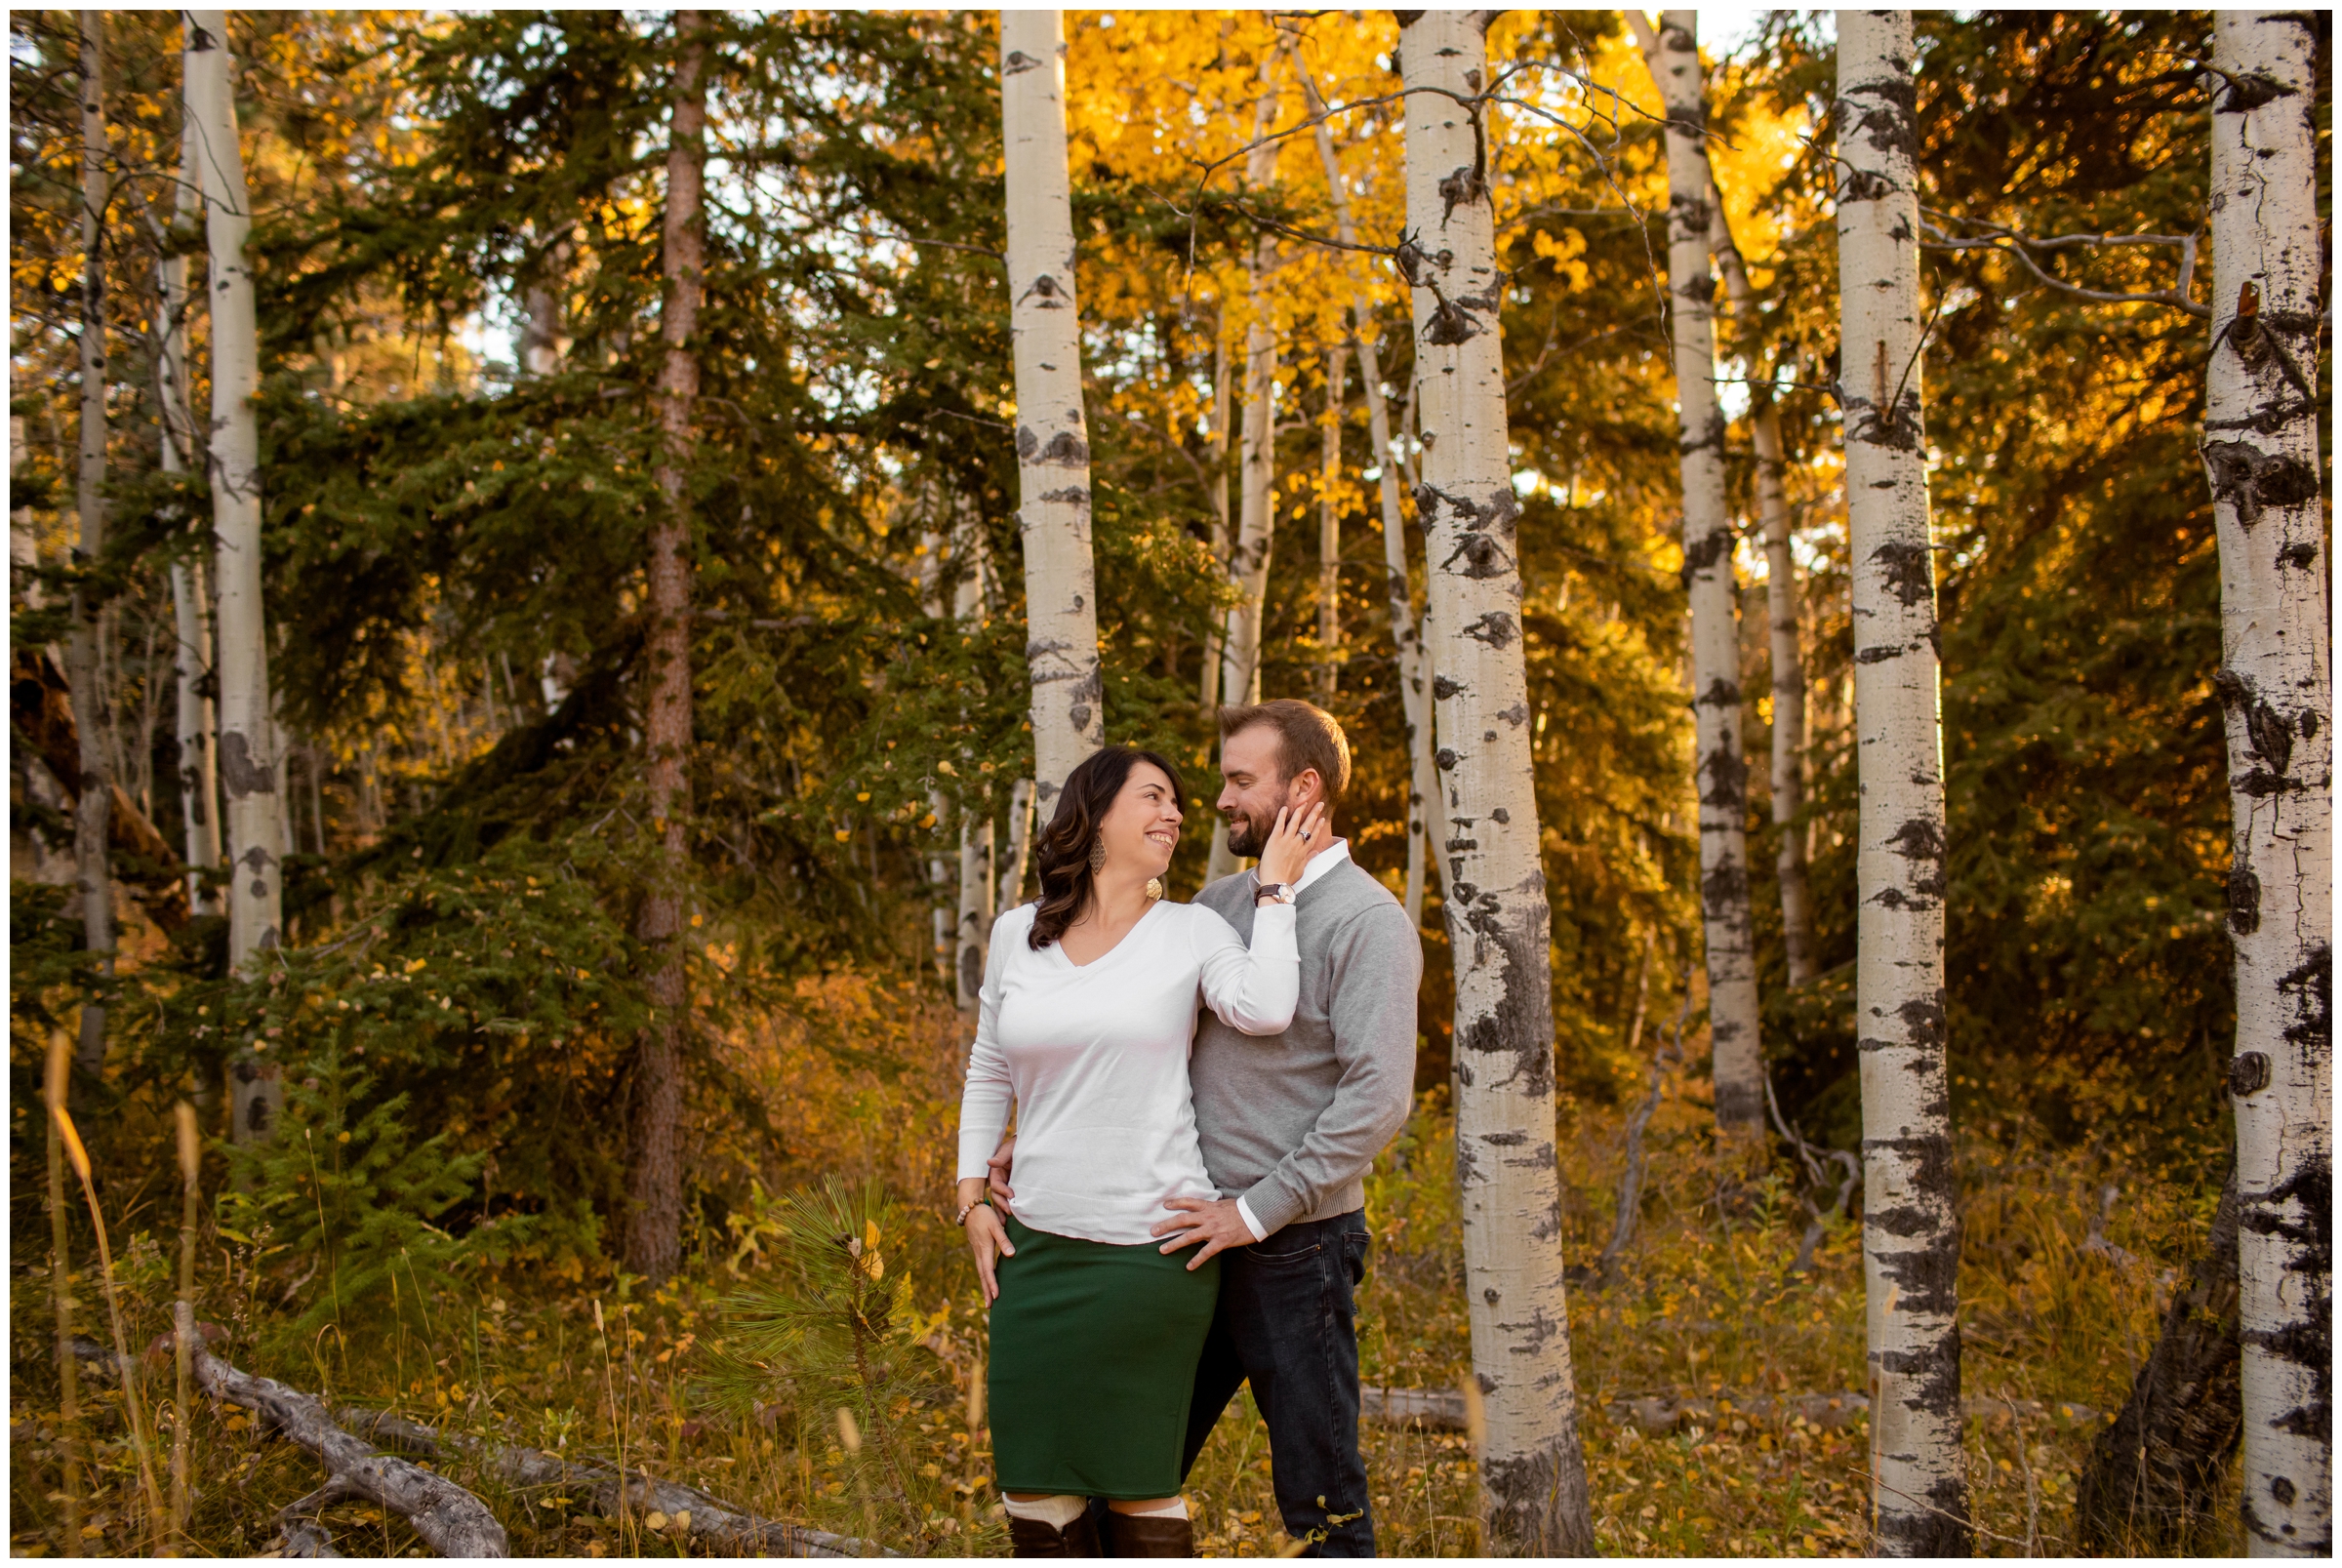 Colorado fall mountain engagement photos at Meyer Ranch Park by CO wedding photographer Plum Pretty Photography